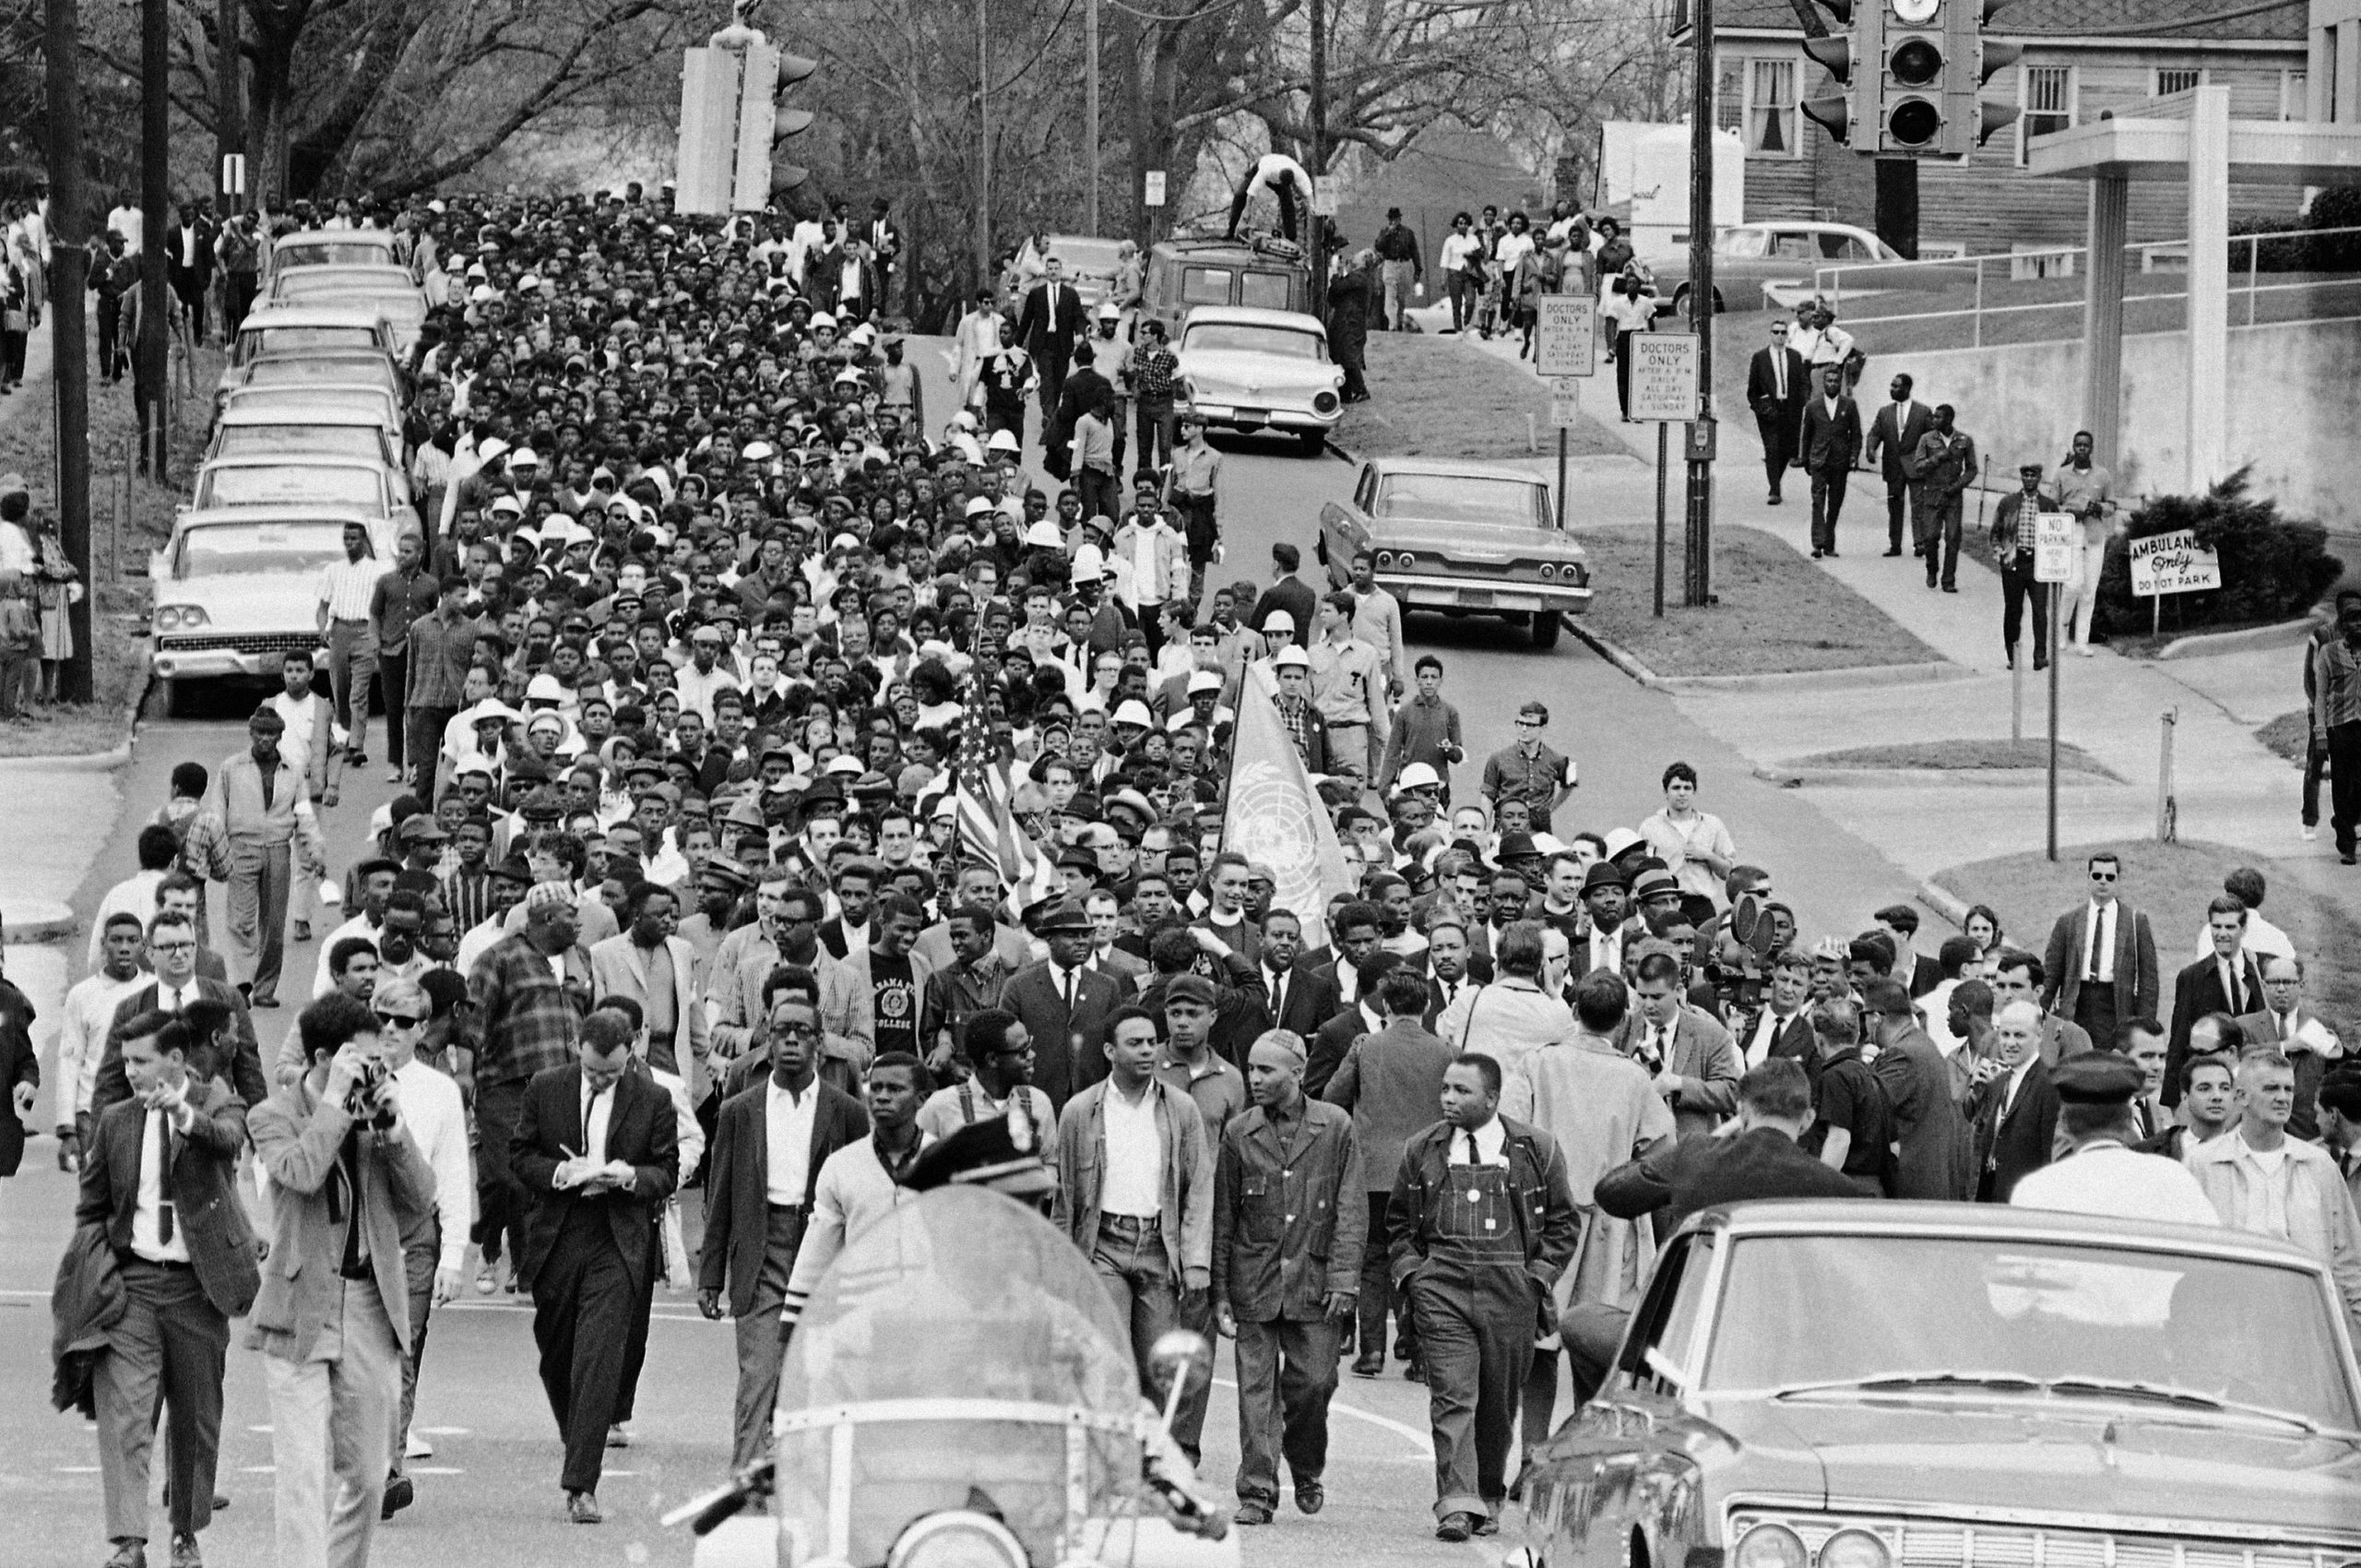 FILE - In this March 17, 1965, file photo, demonstrators walk to the courthouse behind the Rev. Martin Luther King Jr. in Montgomery, Ala. The march was to protest treatment of demonstrators by police during an attempted march. At front and center of march in white shirt is Andrew Young. (AP Photo/File)